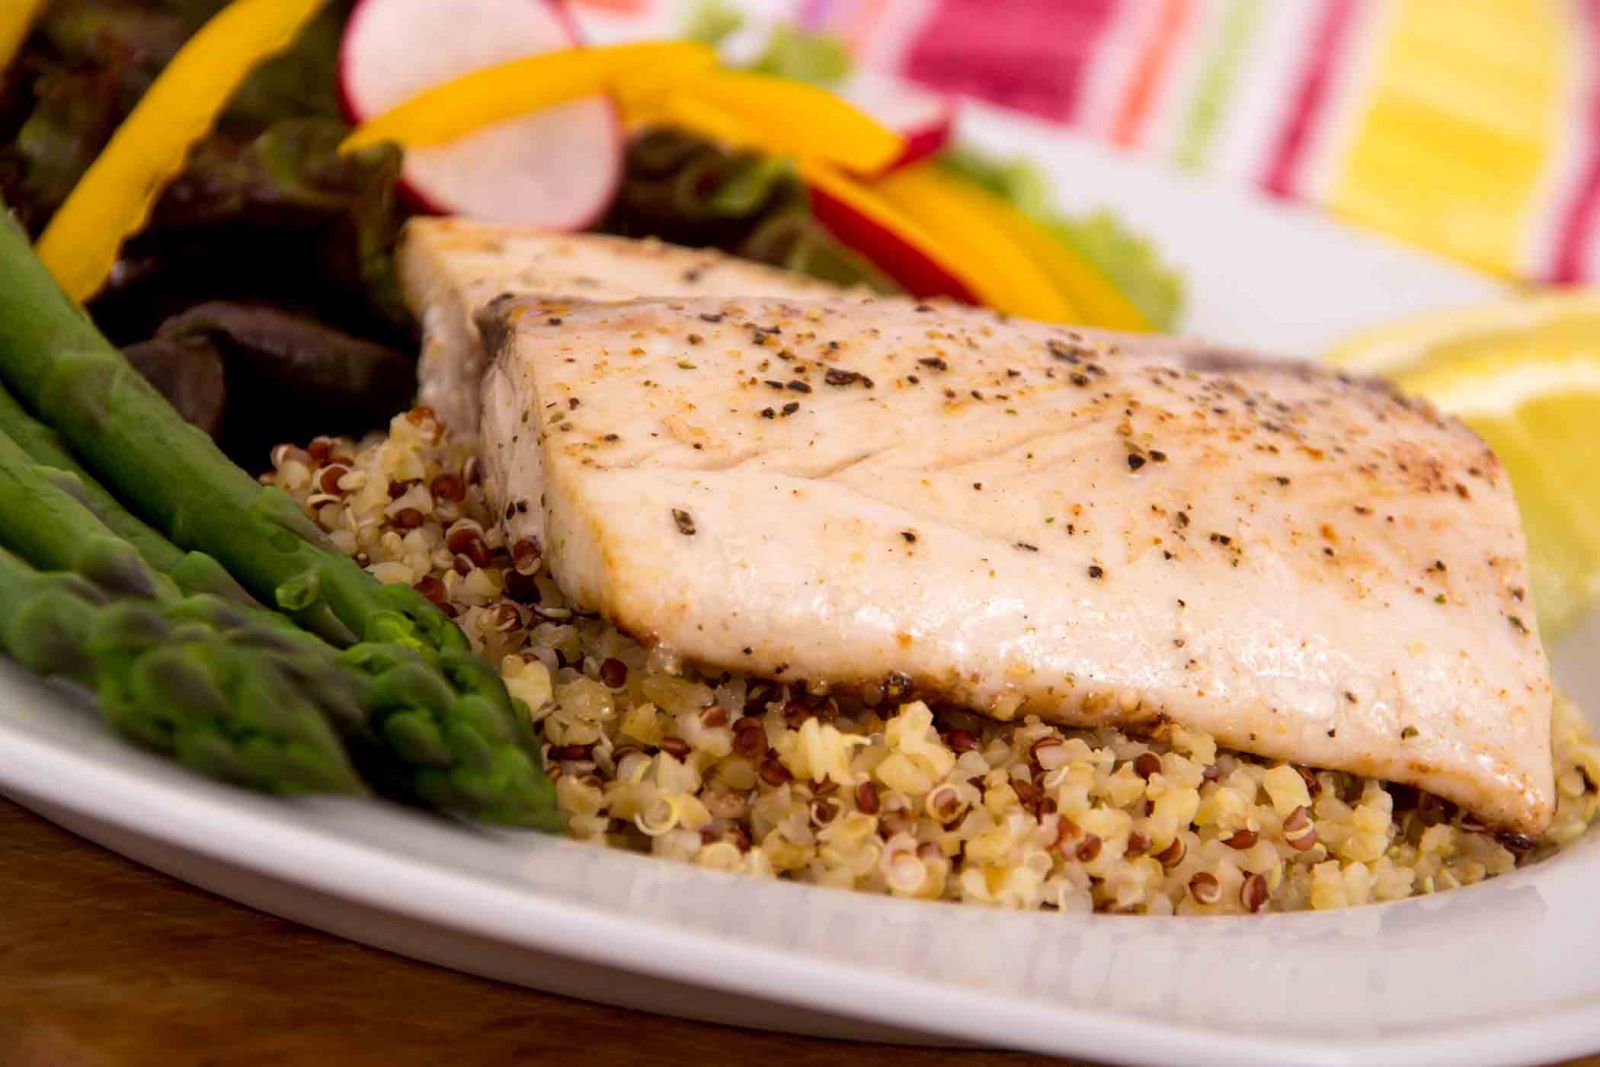 Fresh fish on a bed of quinoa with asparagus